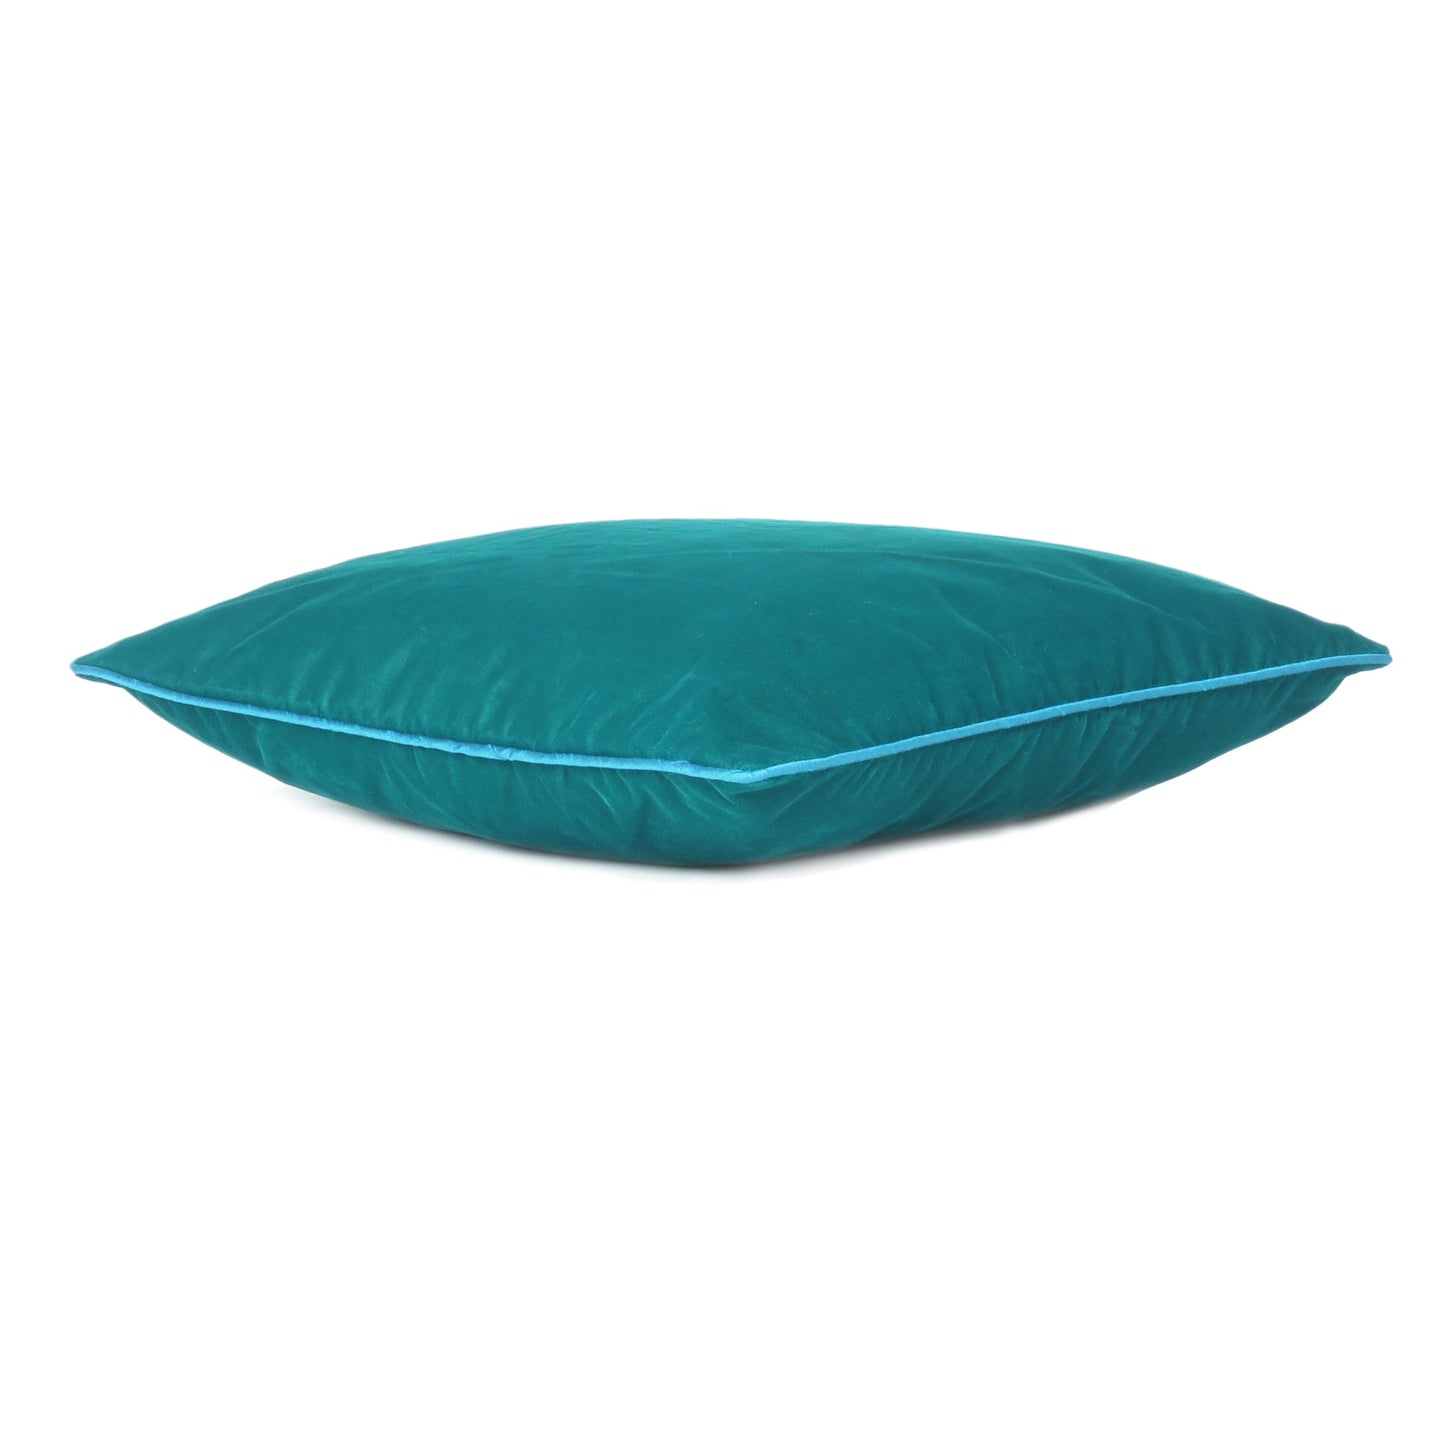 Teal Velvet Cushion Cover with Royal Blue Piping Edge in Set of 2